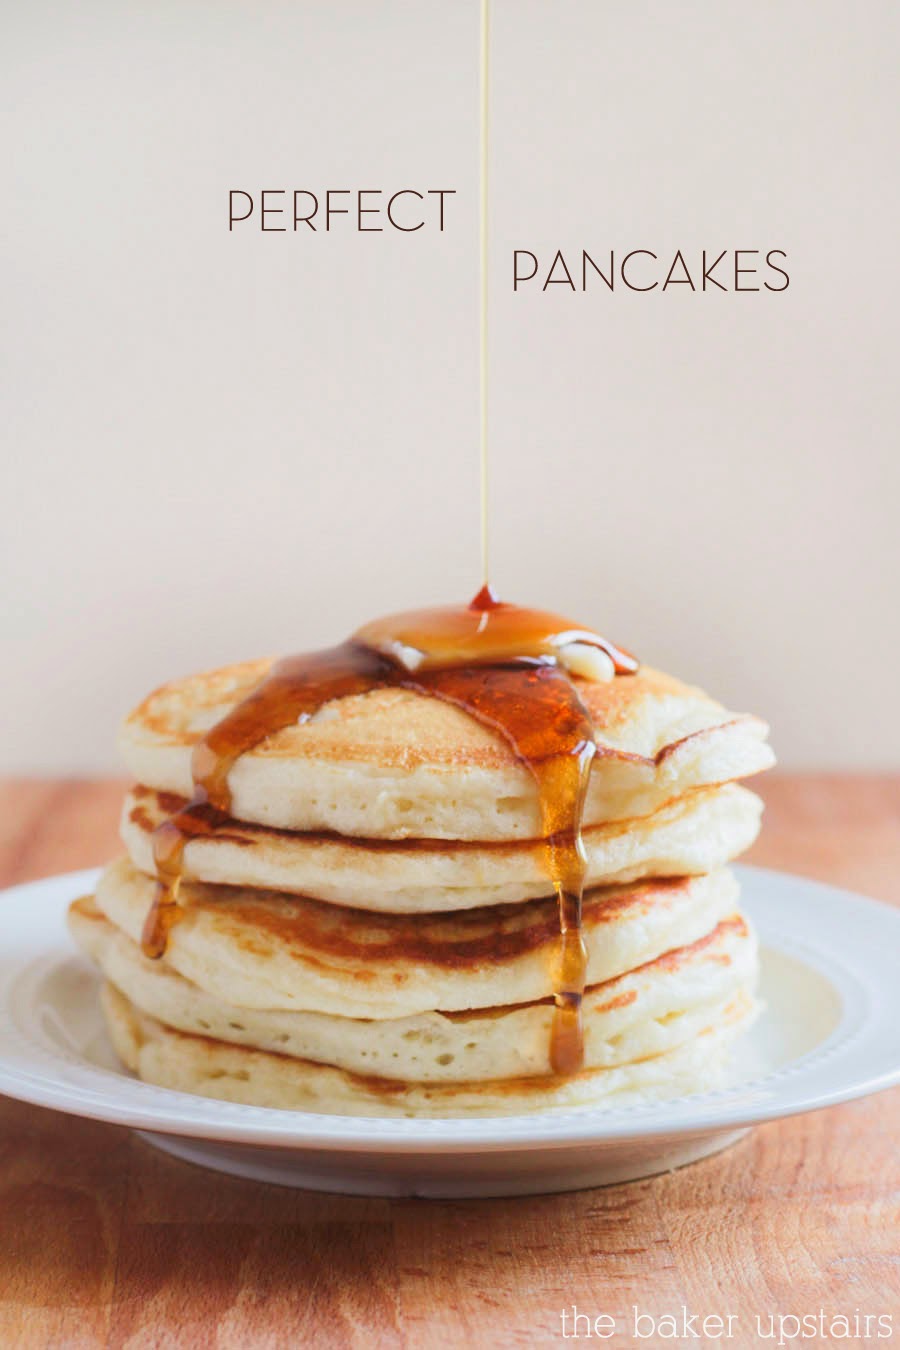 These light and fluffy perfect pancakes are the best! The recipe is simple and easy to make, and the pancakes turn out great every time!